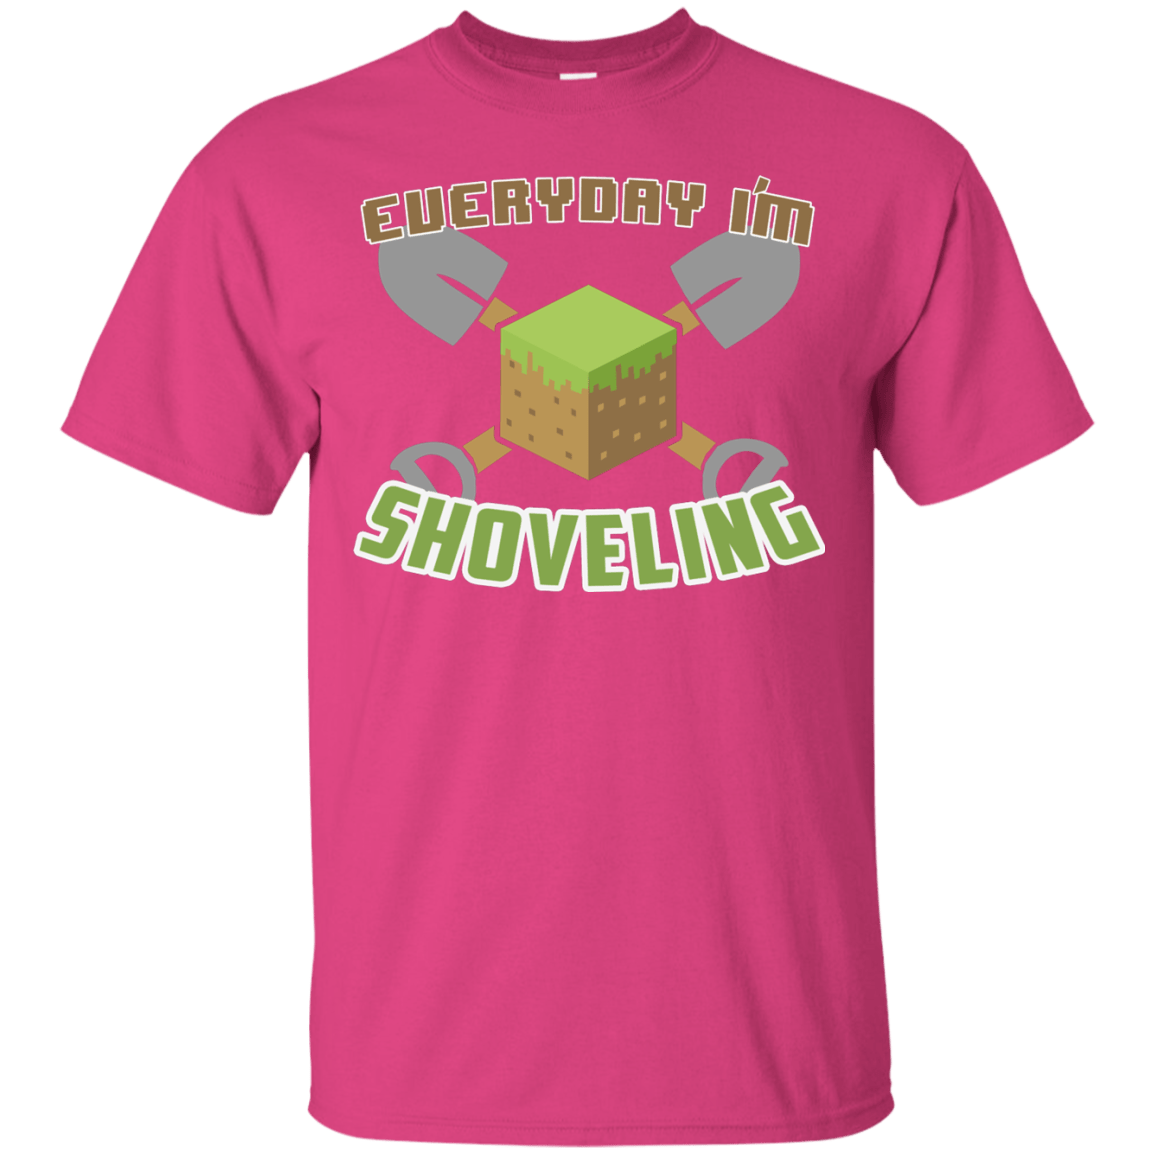 T-Shirts Heliconia / Small Everyday Shoveling T-Shirt